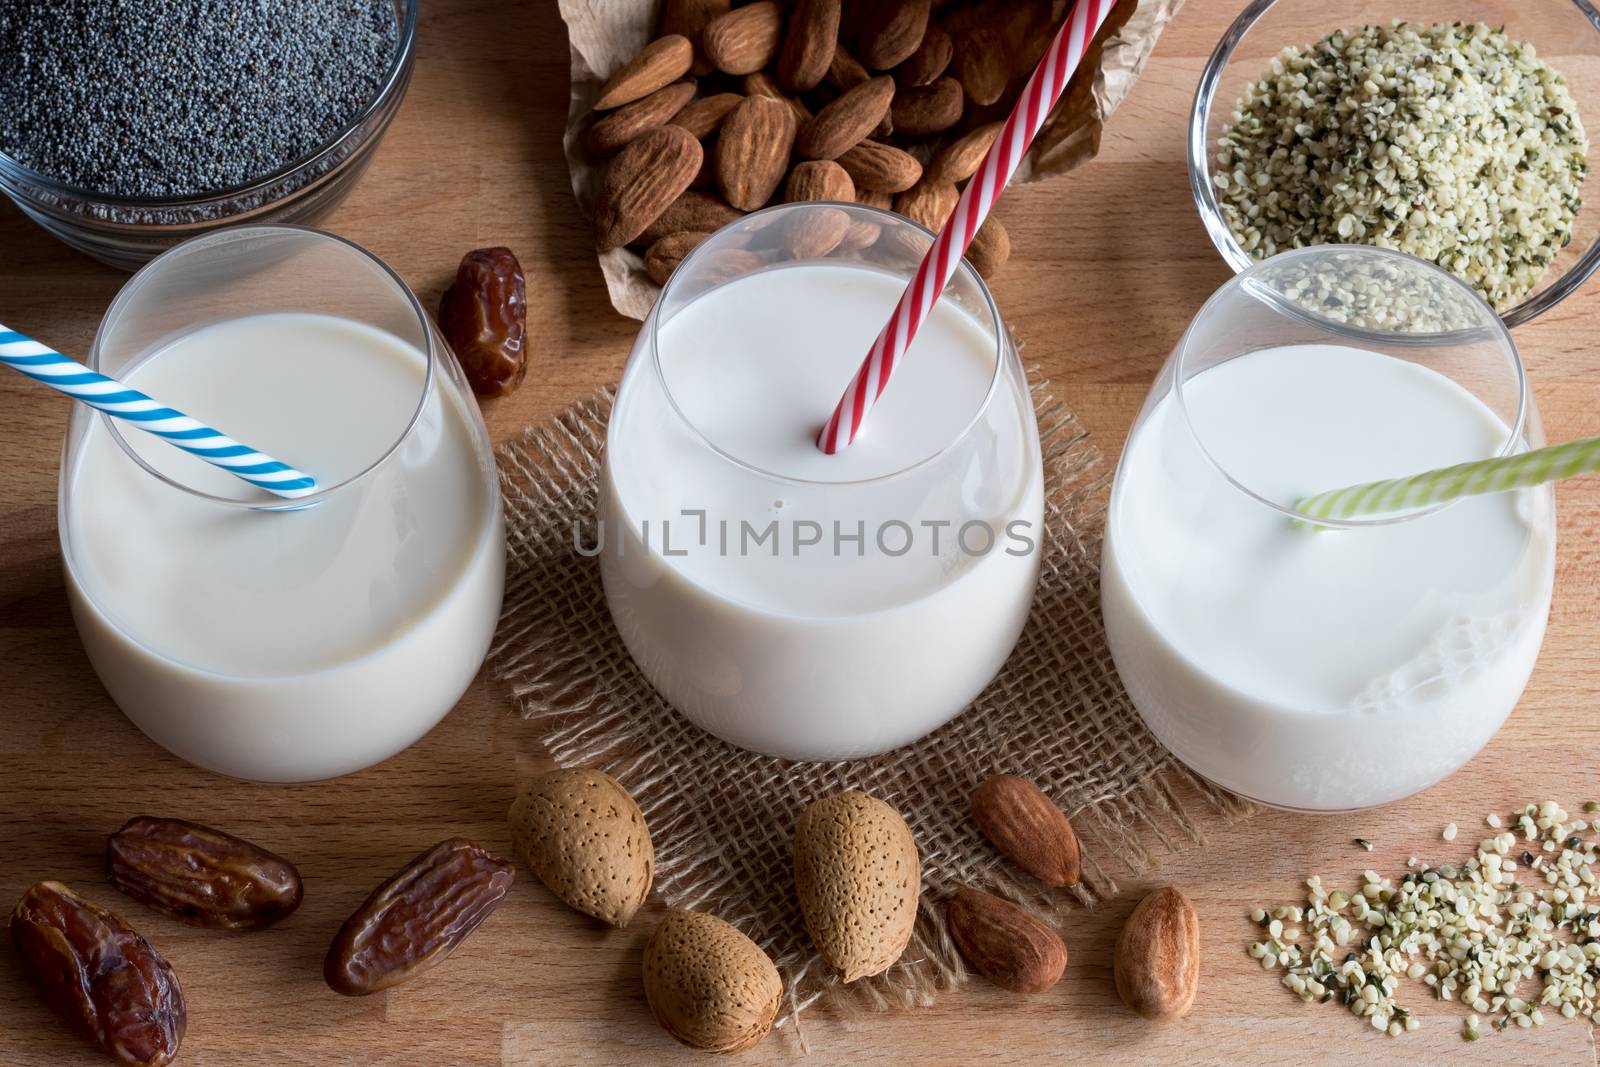 Three glasses of vegan plant milk - almond milk, poppy seed milk and hemp seed milk, with shelled and unshelled almonds, poppy seeds, hemp seeds and dates in the background